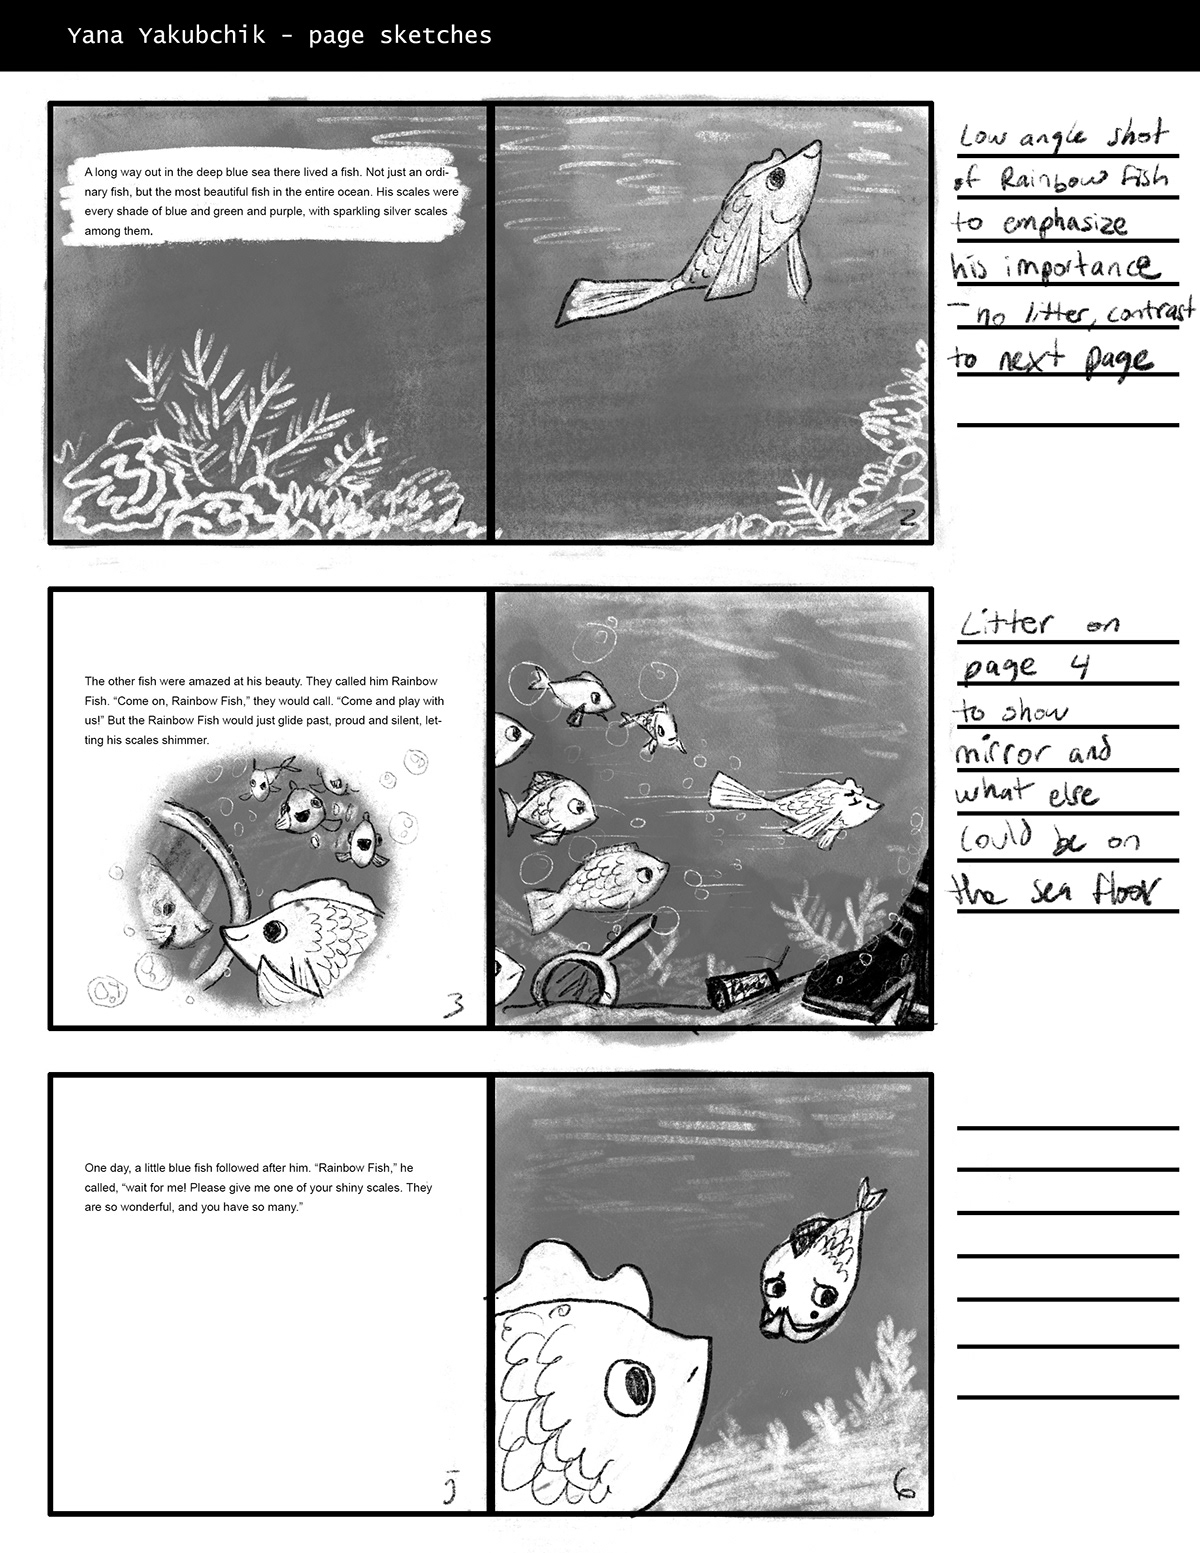 book dummy Drafts drawings kidlitart Picture book sketches